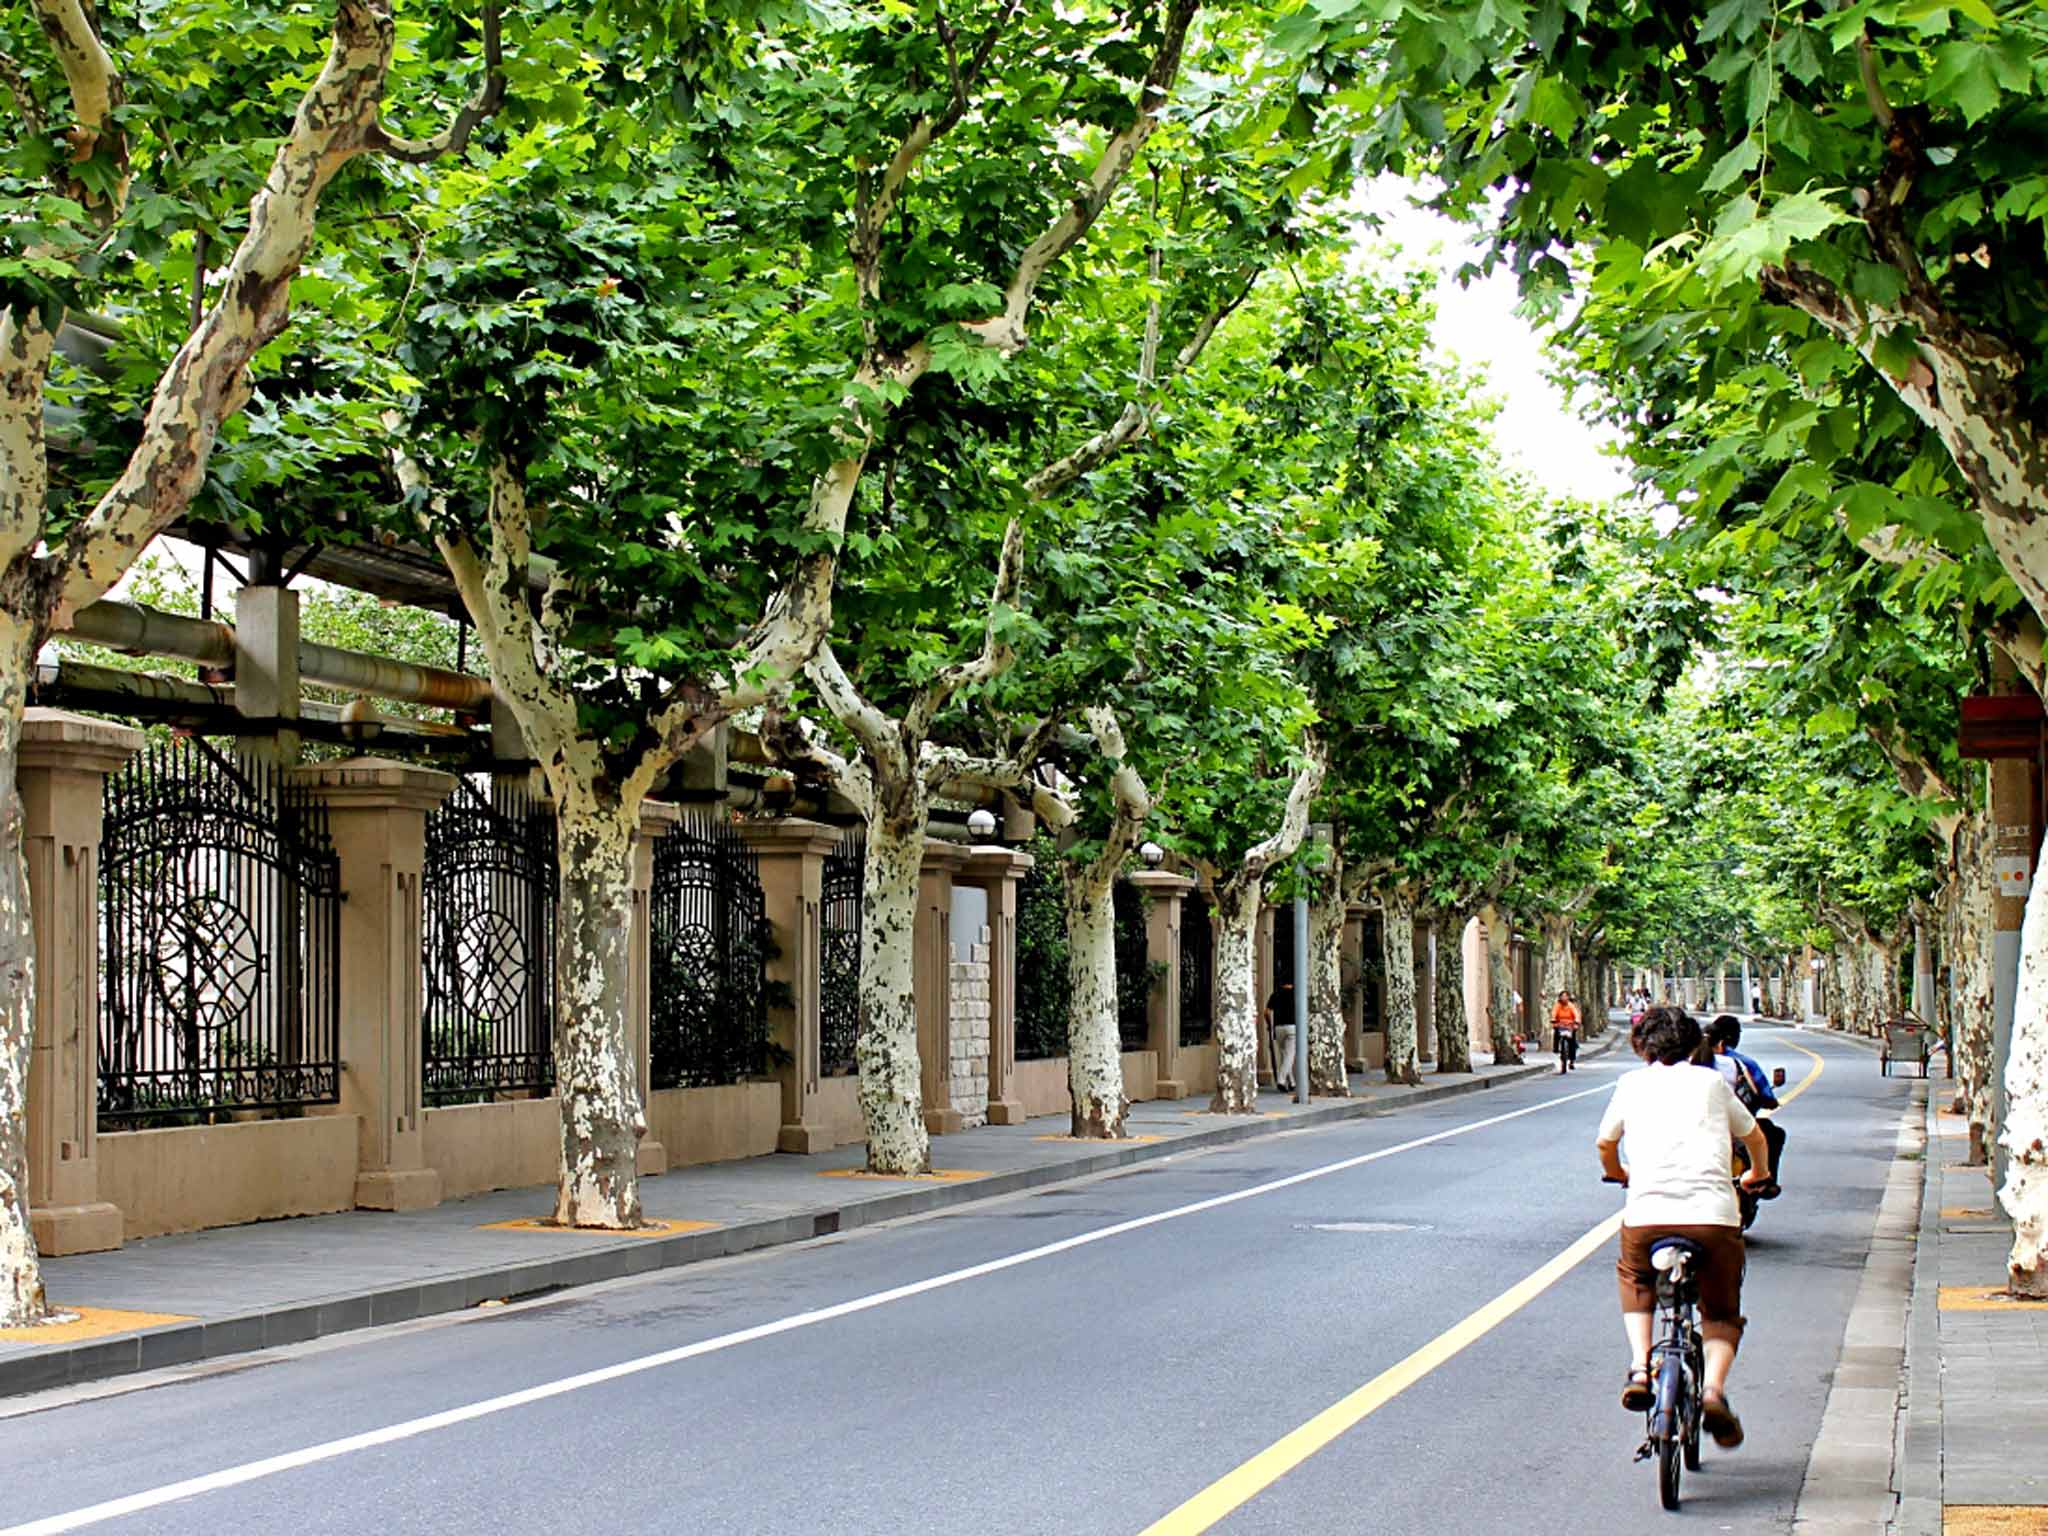 Arbor master: a treelined street in the French Concession